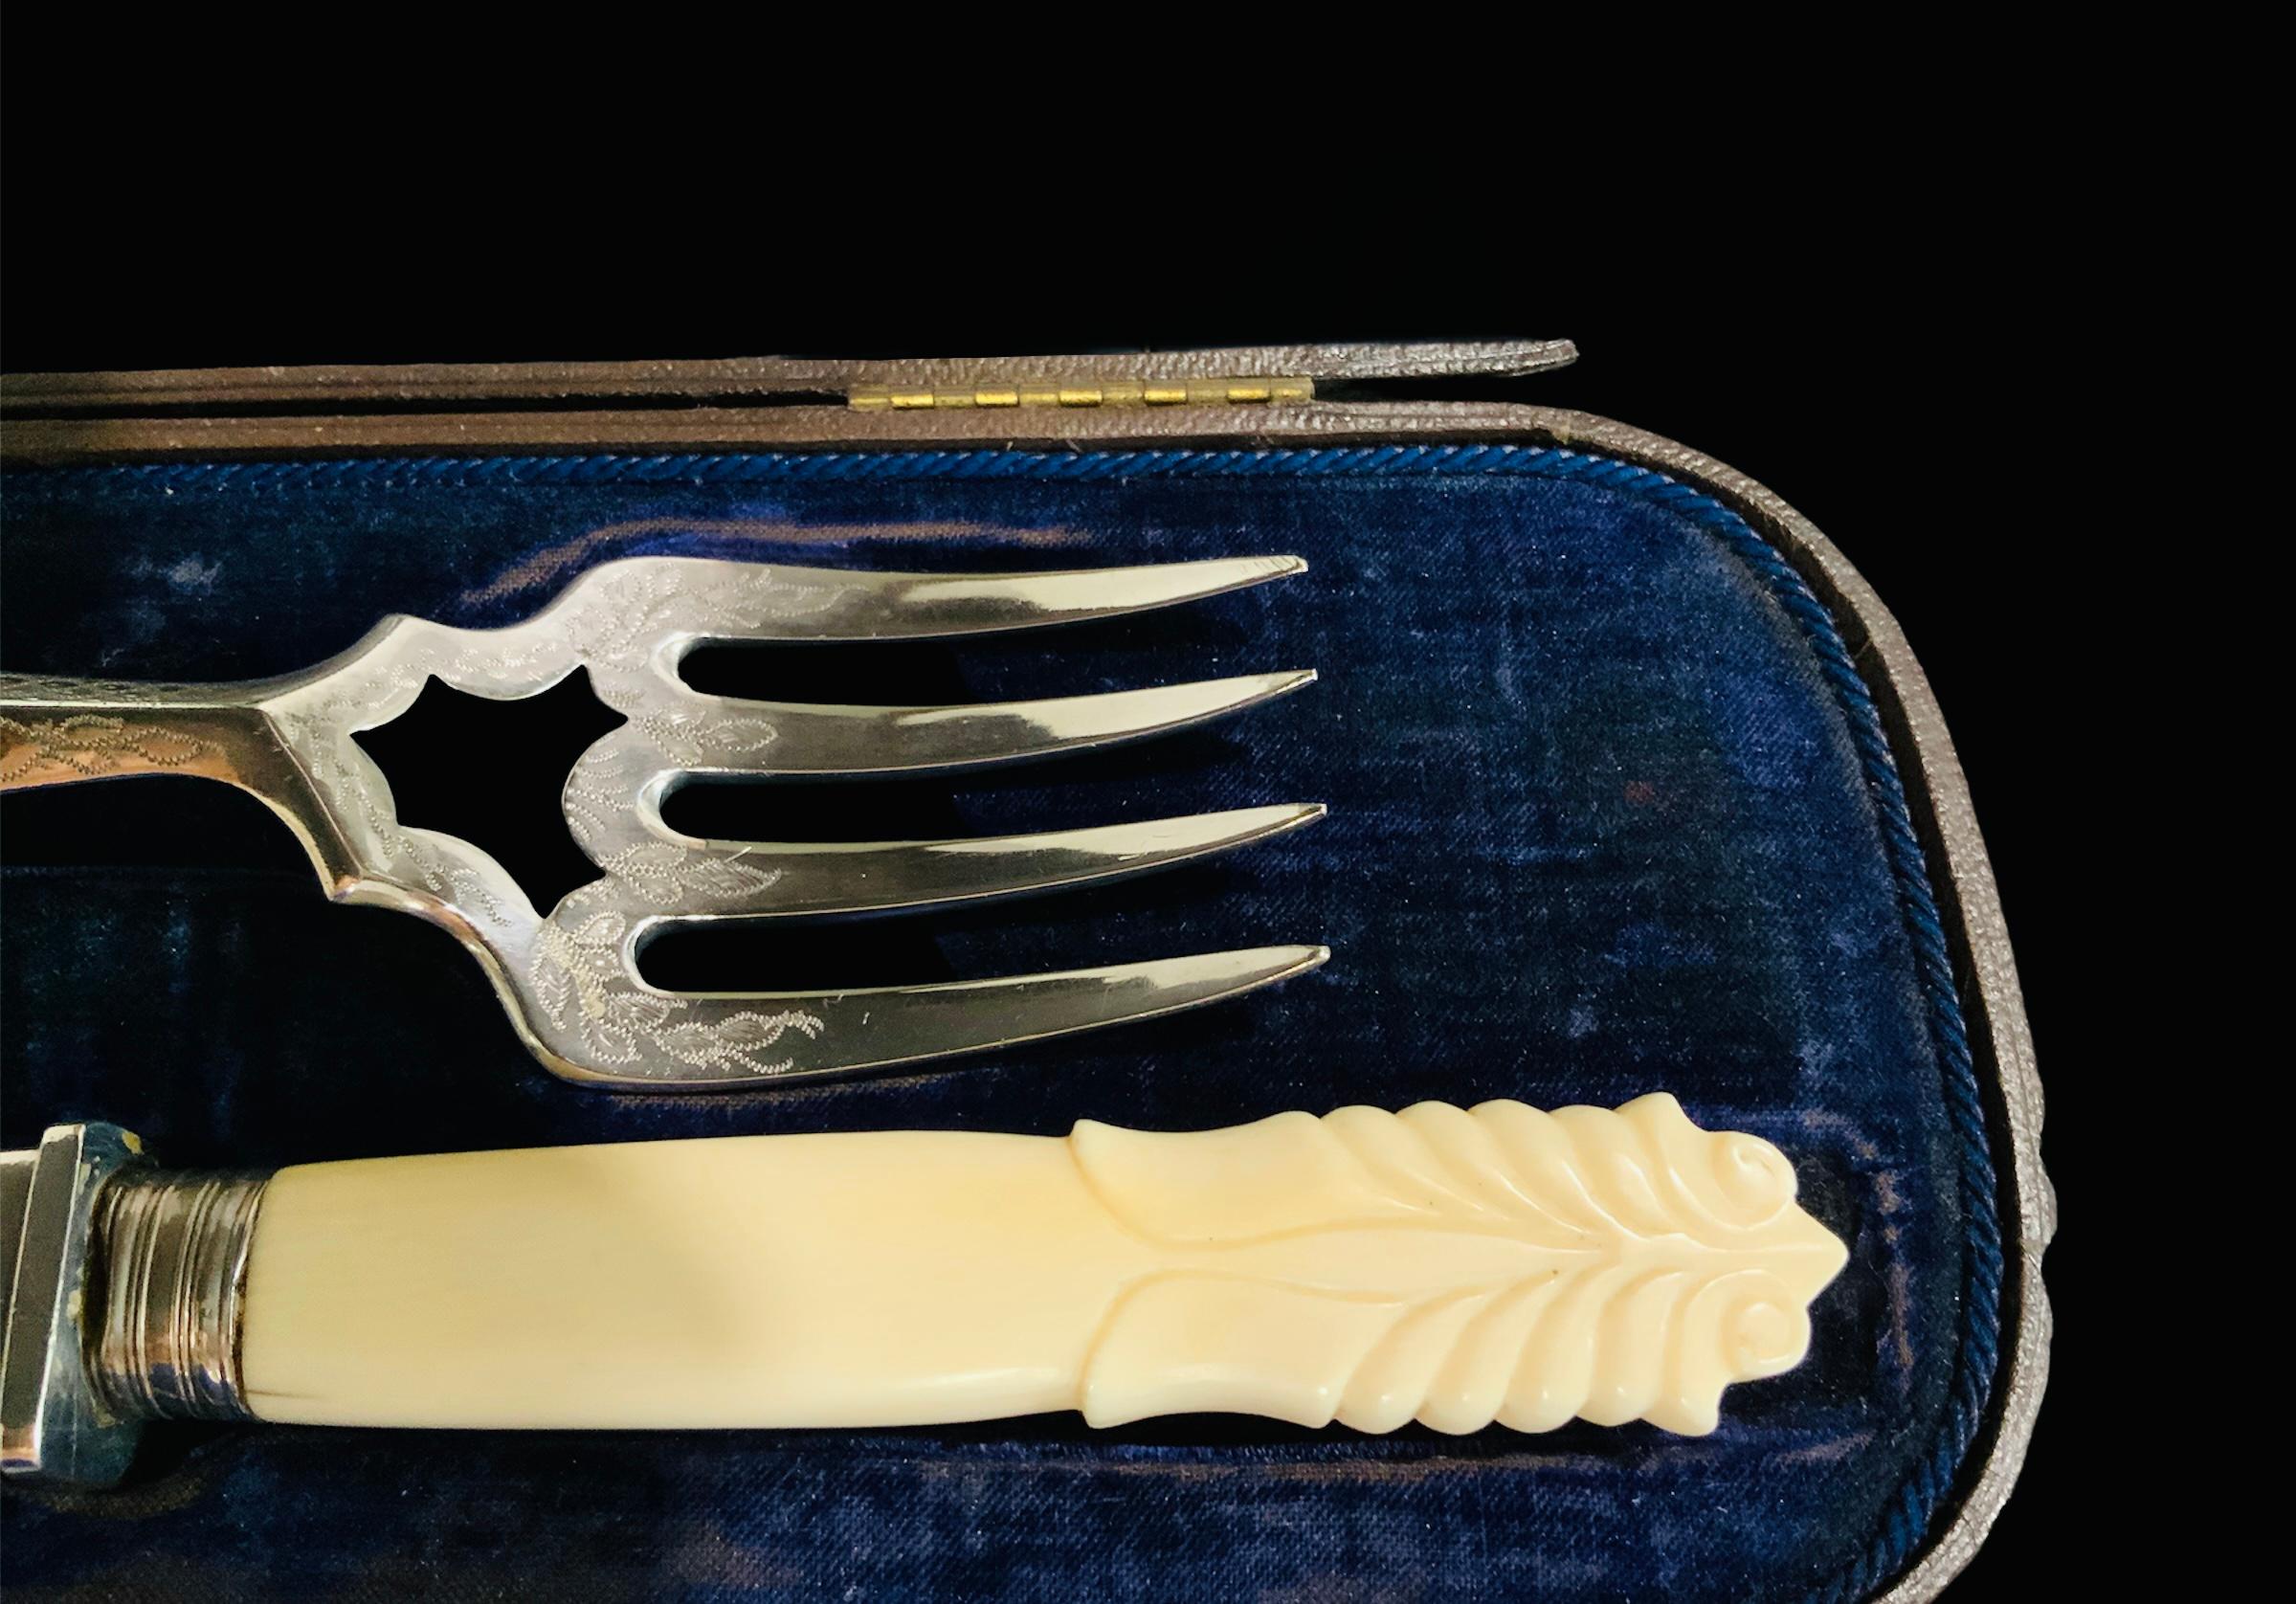 This is a 19th century English set of fish serving fork and knife. They could be or could not be sterling silver, but I am unable to test them. Their handles are made of ivory like material and their tops are shaped as scrolls of acanthus leaves.